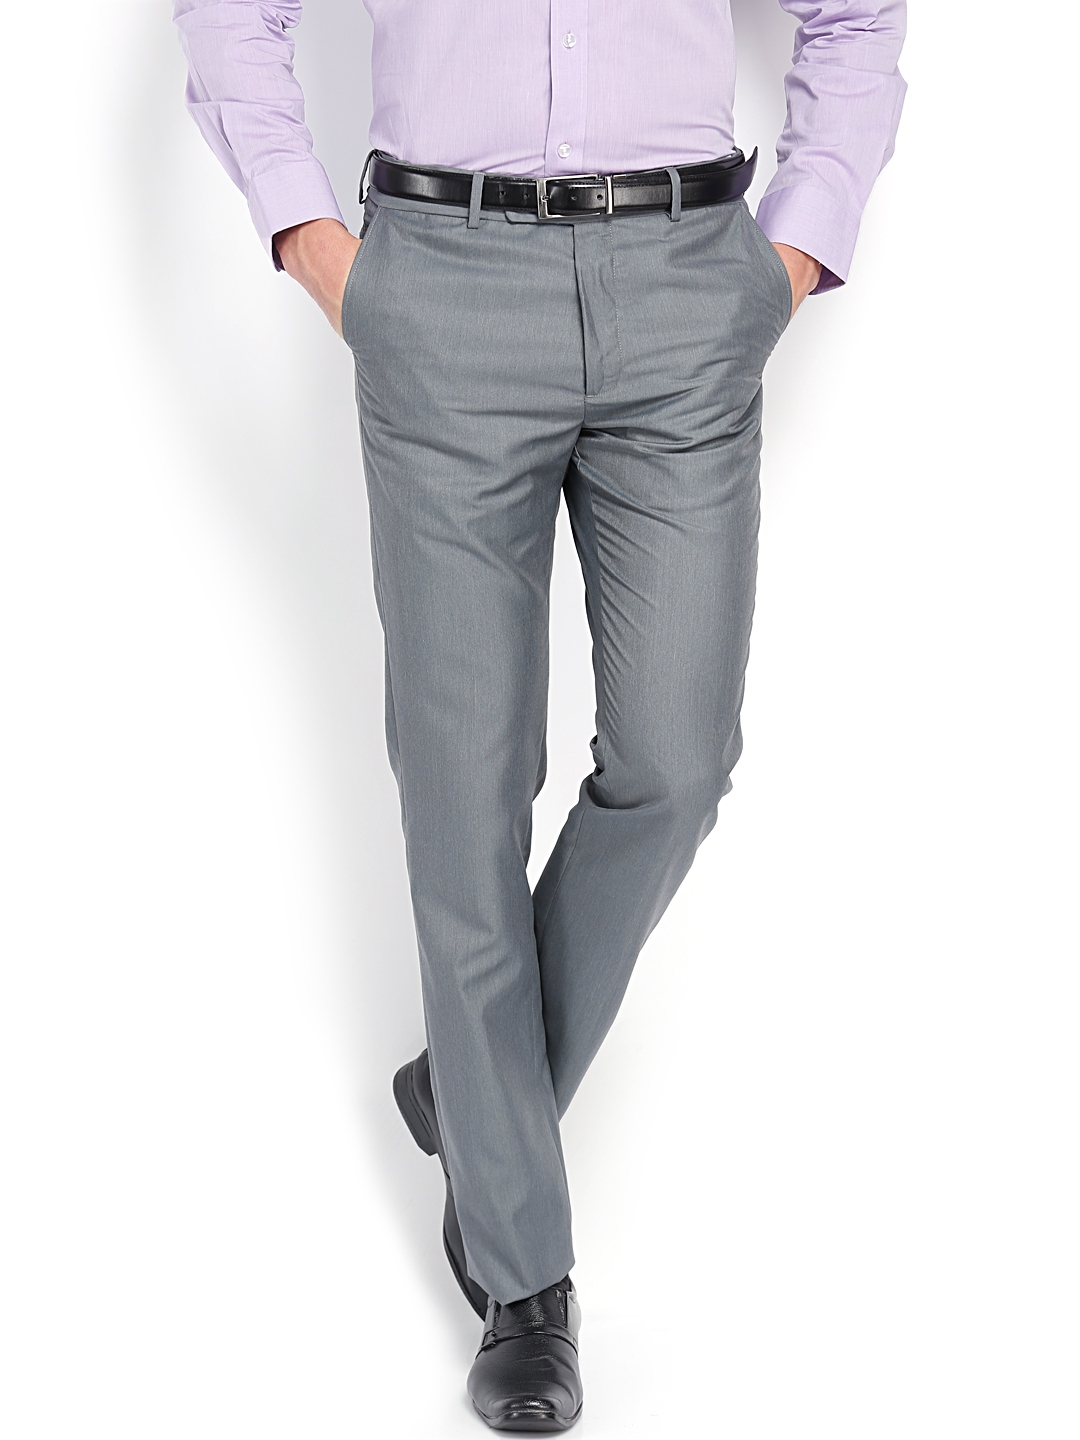 Buy BASICS Grey Structured Cotton Stretch Slim Tapered Fit Mens Trousers   Shoppers Stop